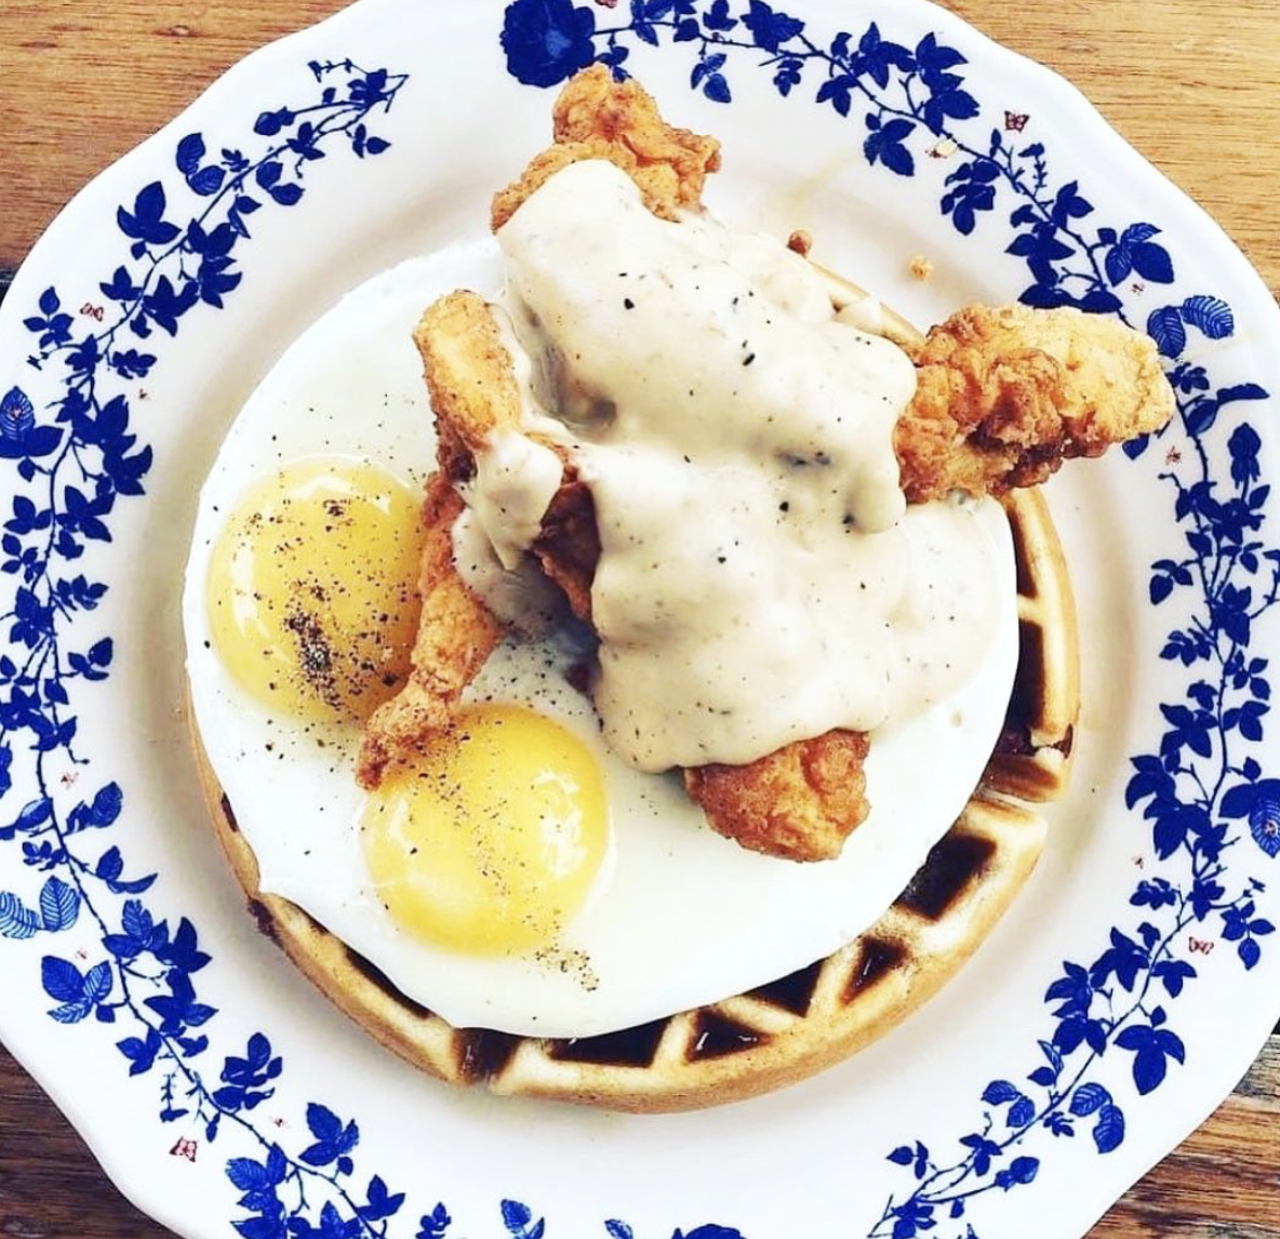 Ida Claire
7300 Jones Maltsberger Rd, (210) 667-2145, ida-claire.com
If brunch with a little bit of southern hospitality charm is your mom’s jam, post up at a table at Ida Claire, where authentic comfort food meets an elevated experience. 
Photo via Instagram / idaclairesa